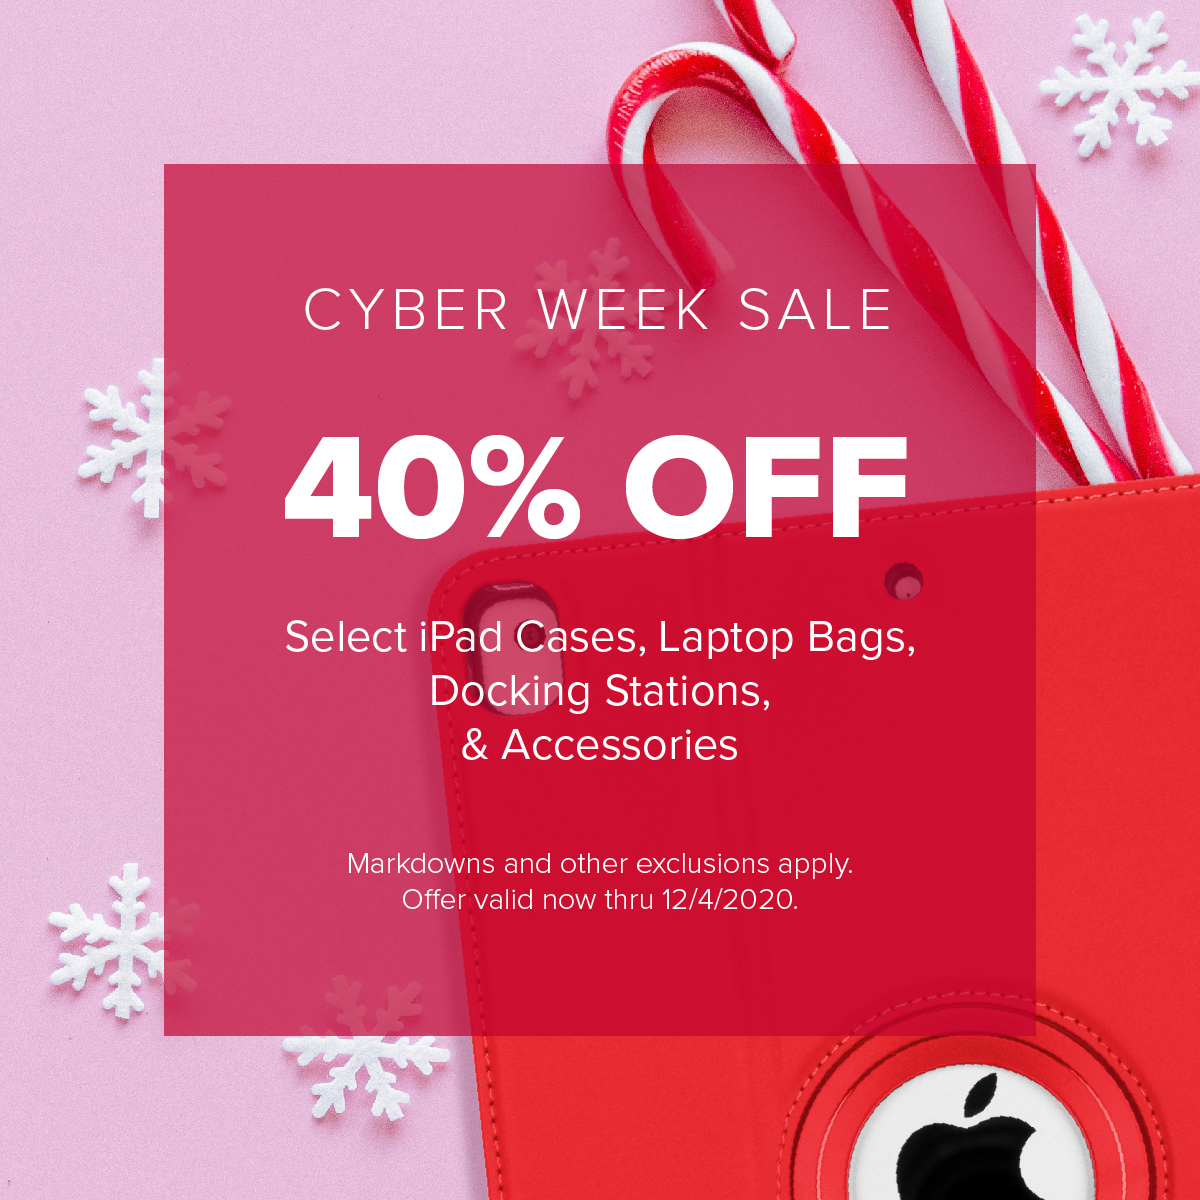 Cyber Week Sale | 40% Off Select iPad Cases, Laptop Bags, Docking Stations, & Accessories